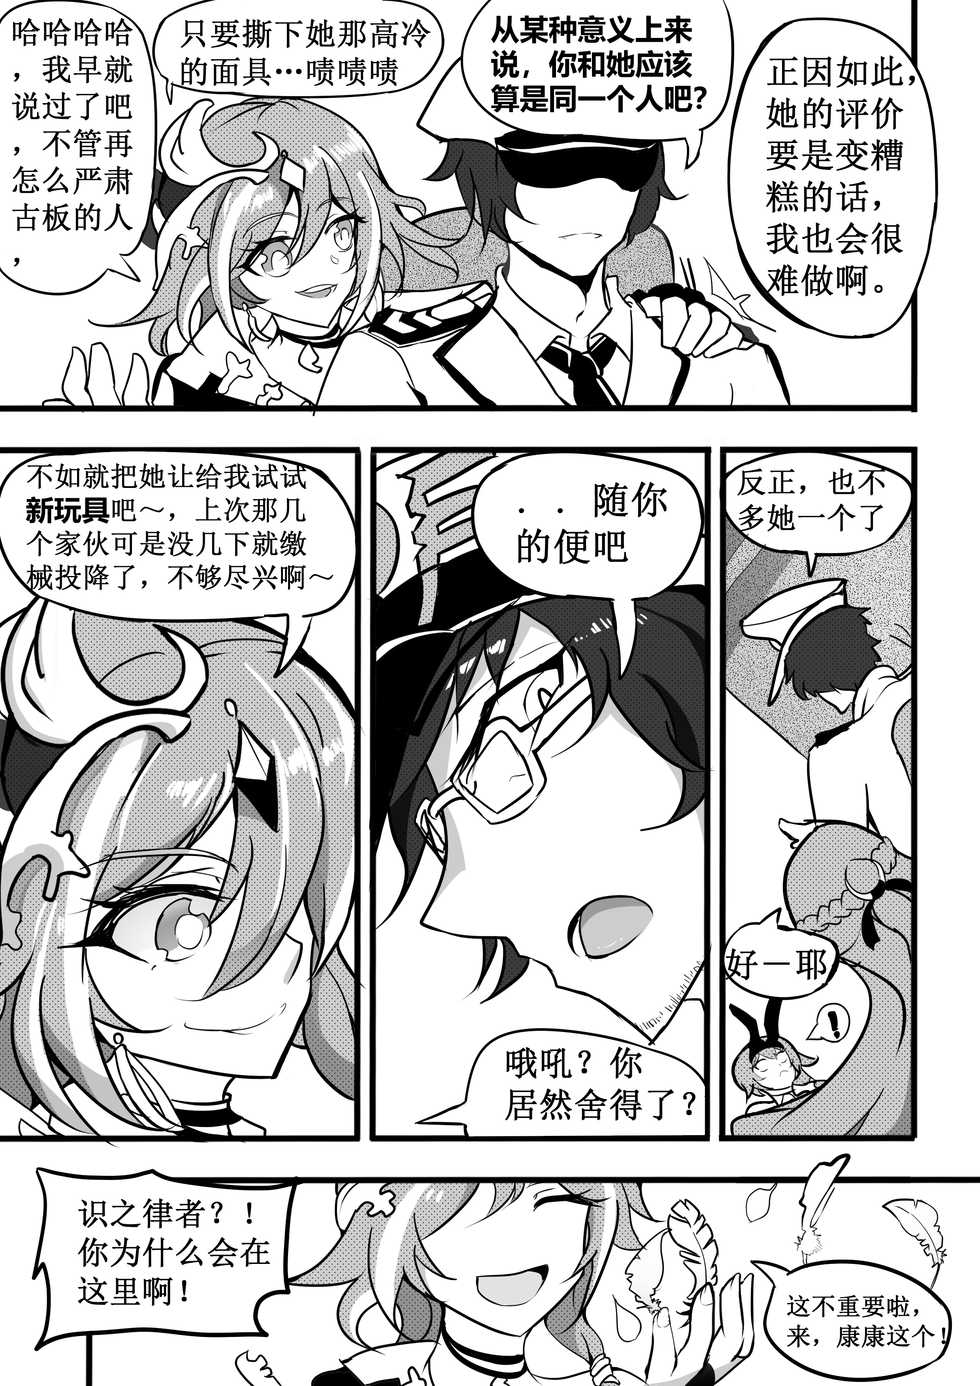 (White Bank) Collapse 1-6 (Honkai Impact 3rd) [Chinese] - Page 38